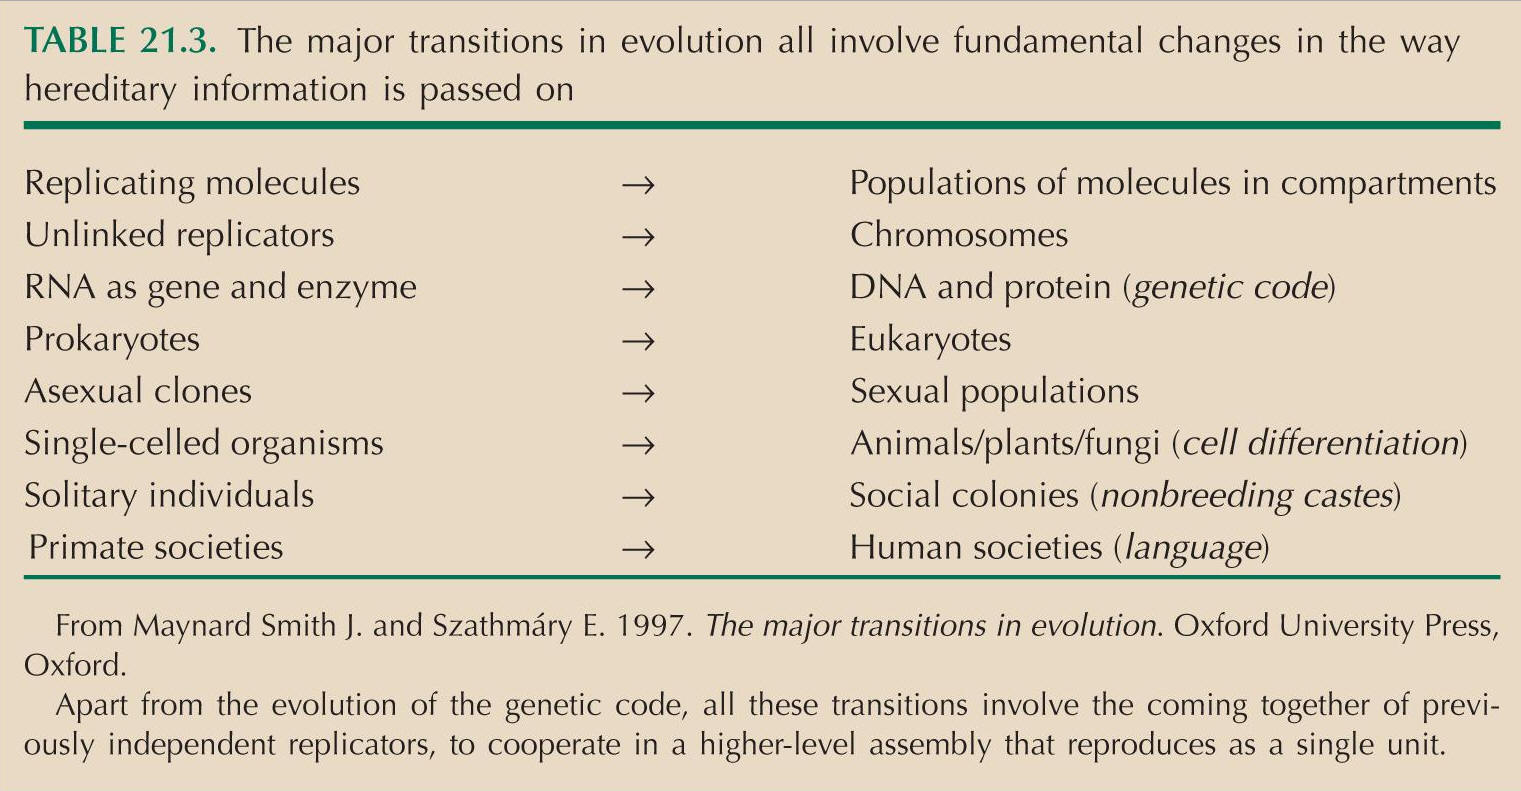 levels of hierarcy in biology and role of cooperation in transitions